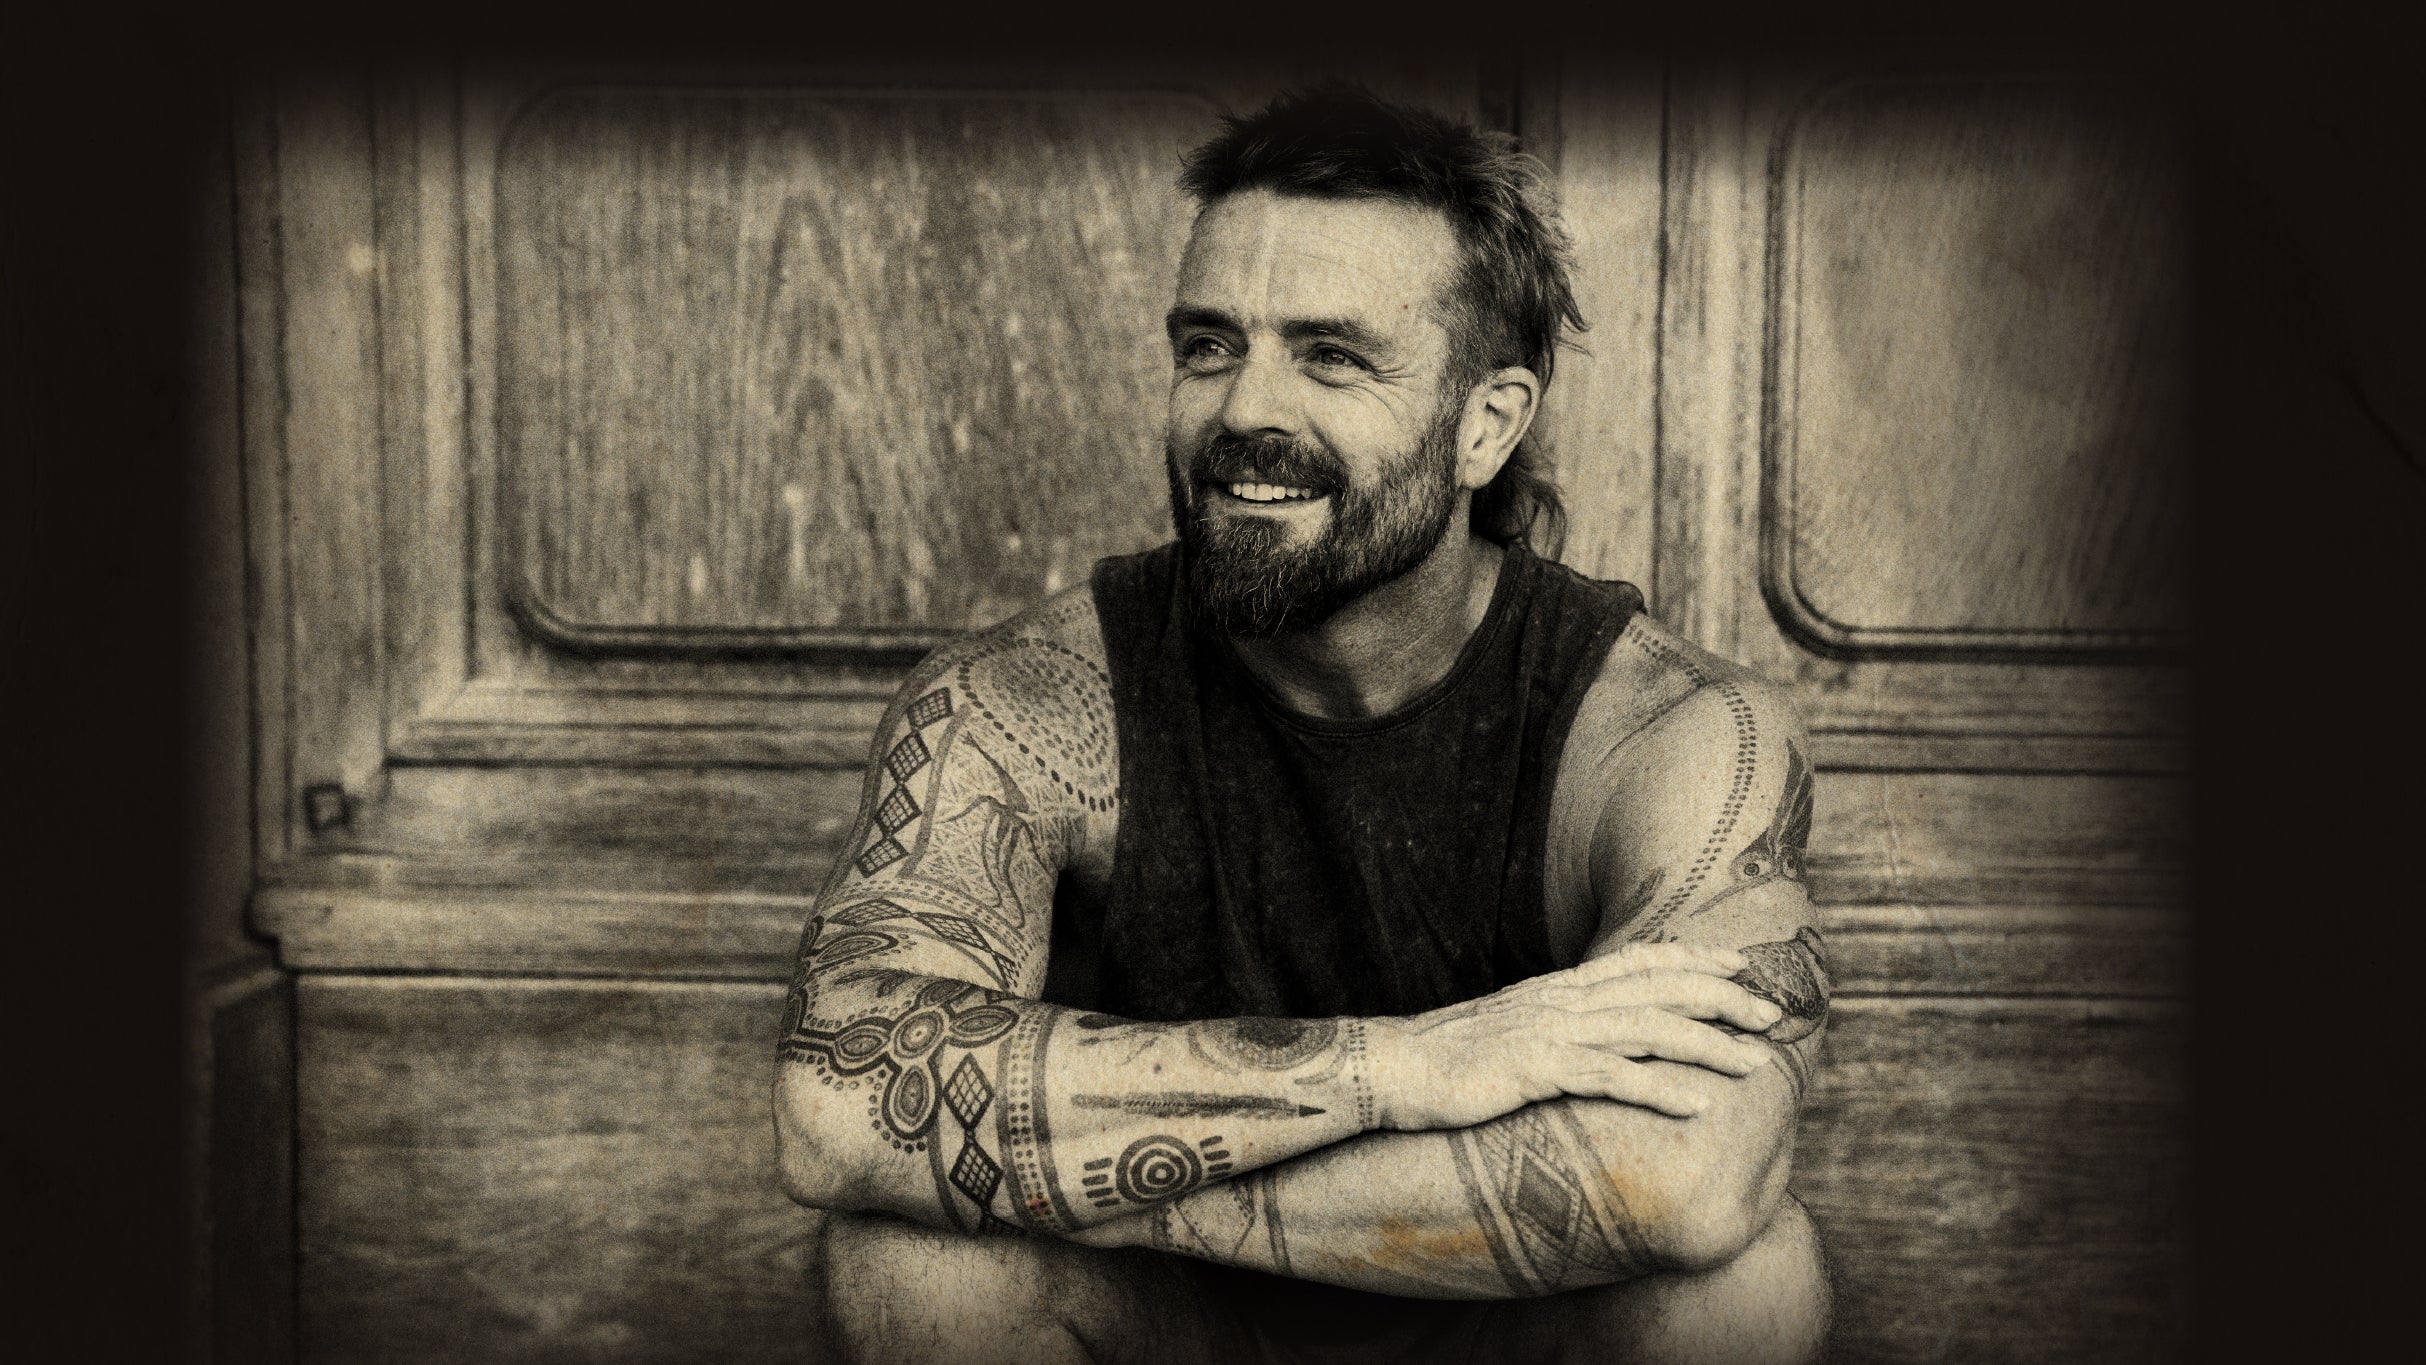 Xavier Rudd in Fremantle promo photo for Exclusive presale offer code